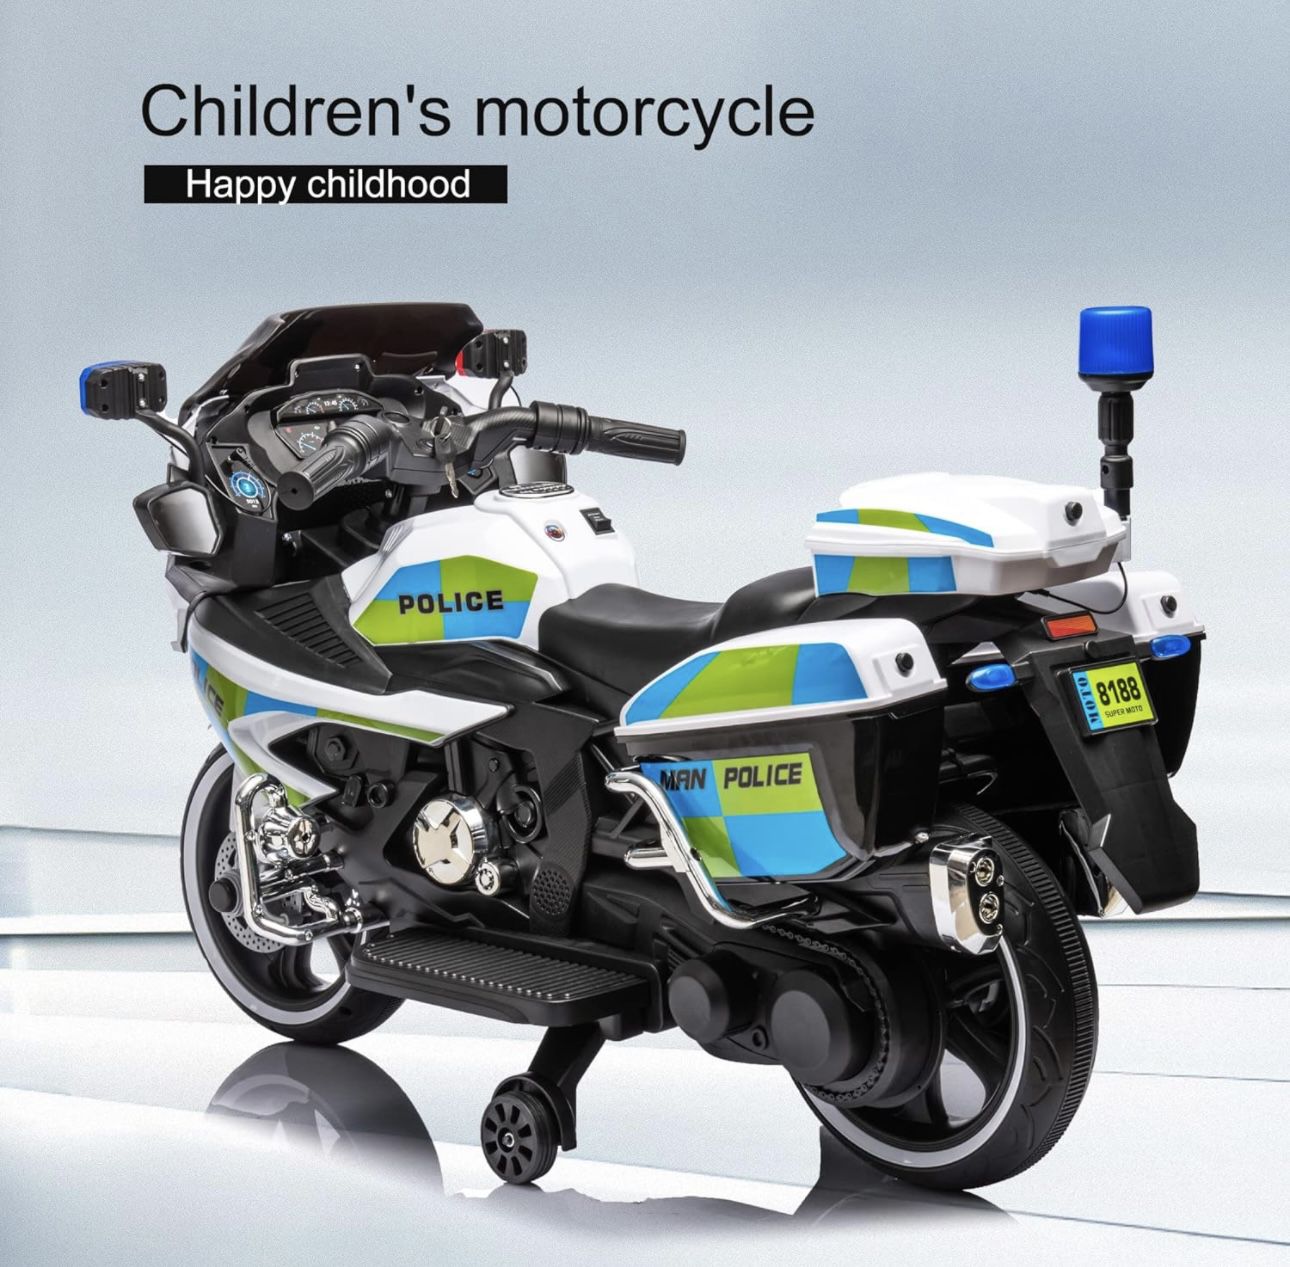 Kids Ride on Motorcycle,12V Toddler Motorized Ride on Toys,Police Electric Motorcycle with Training Wheels,Forward/Reverse,Alarm Lights,Power Display,